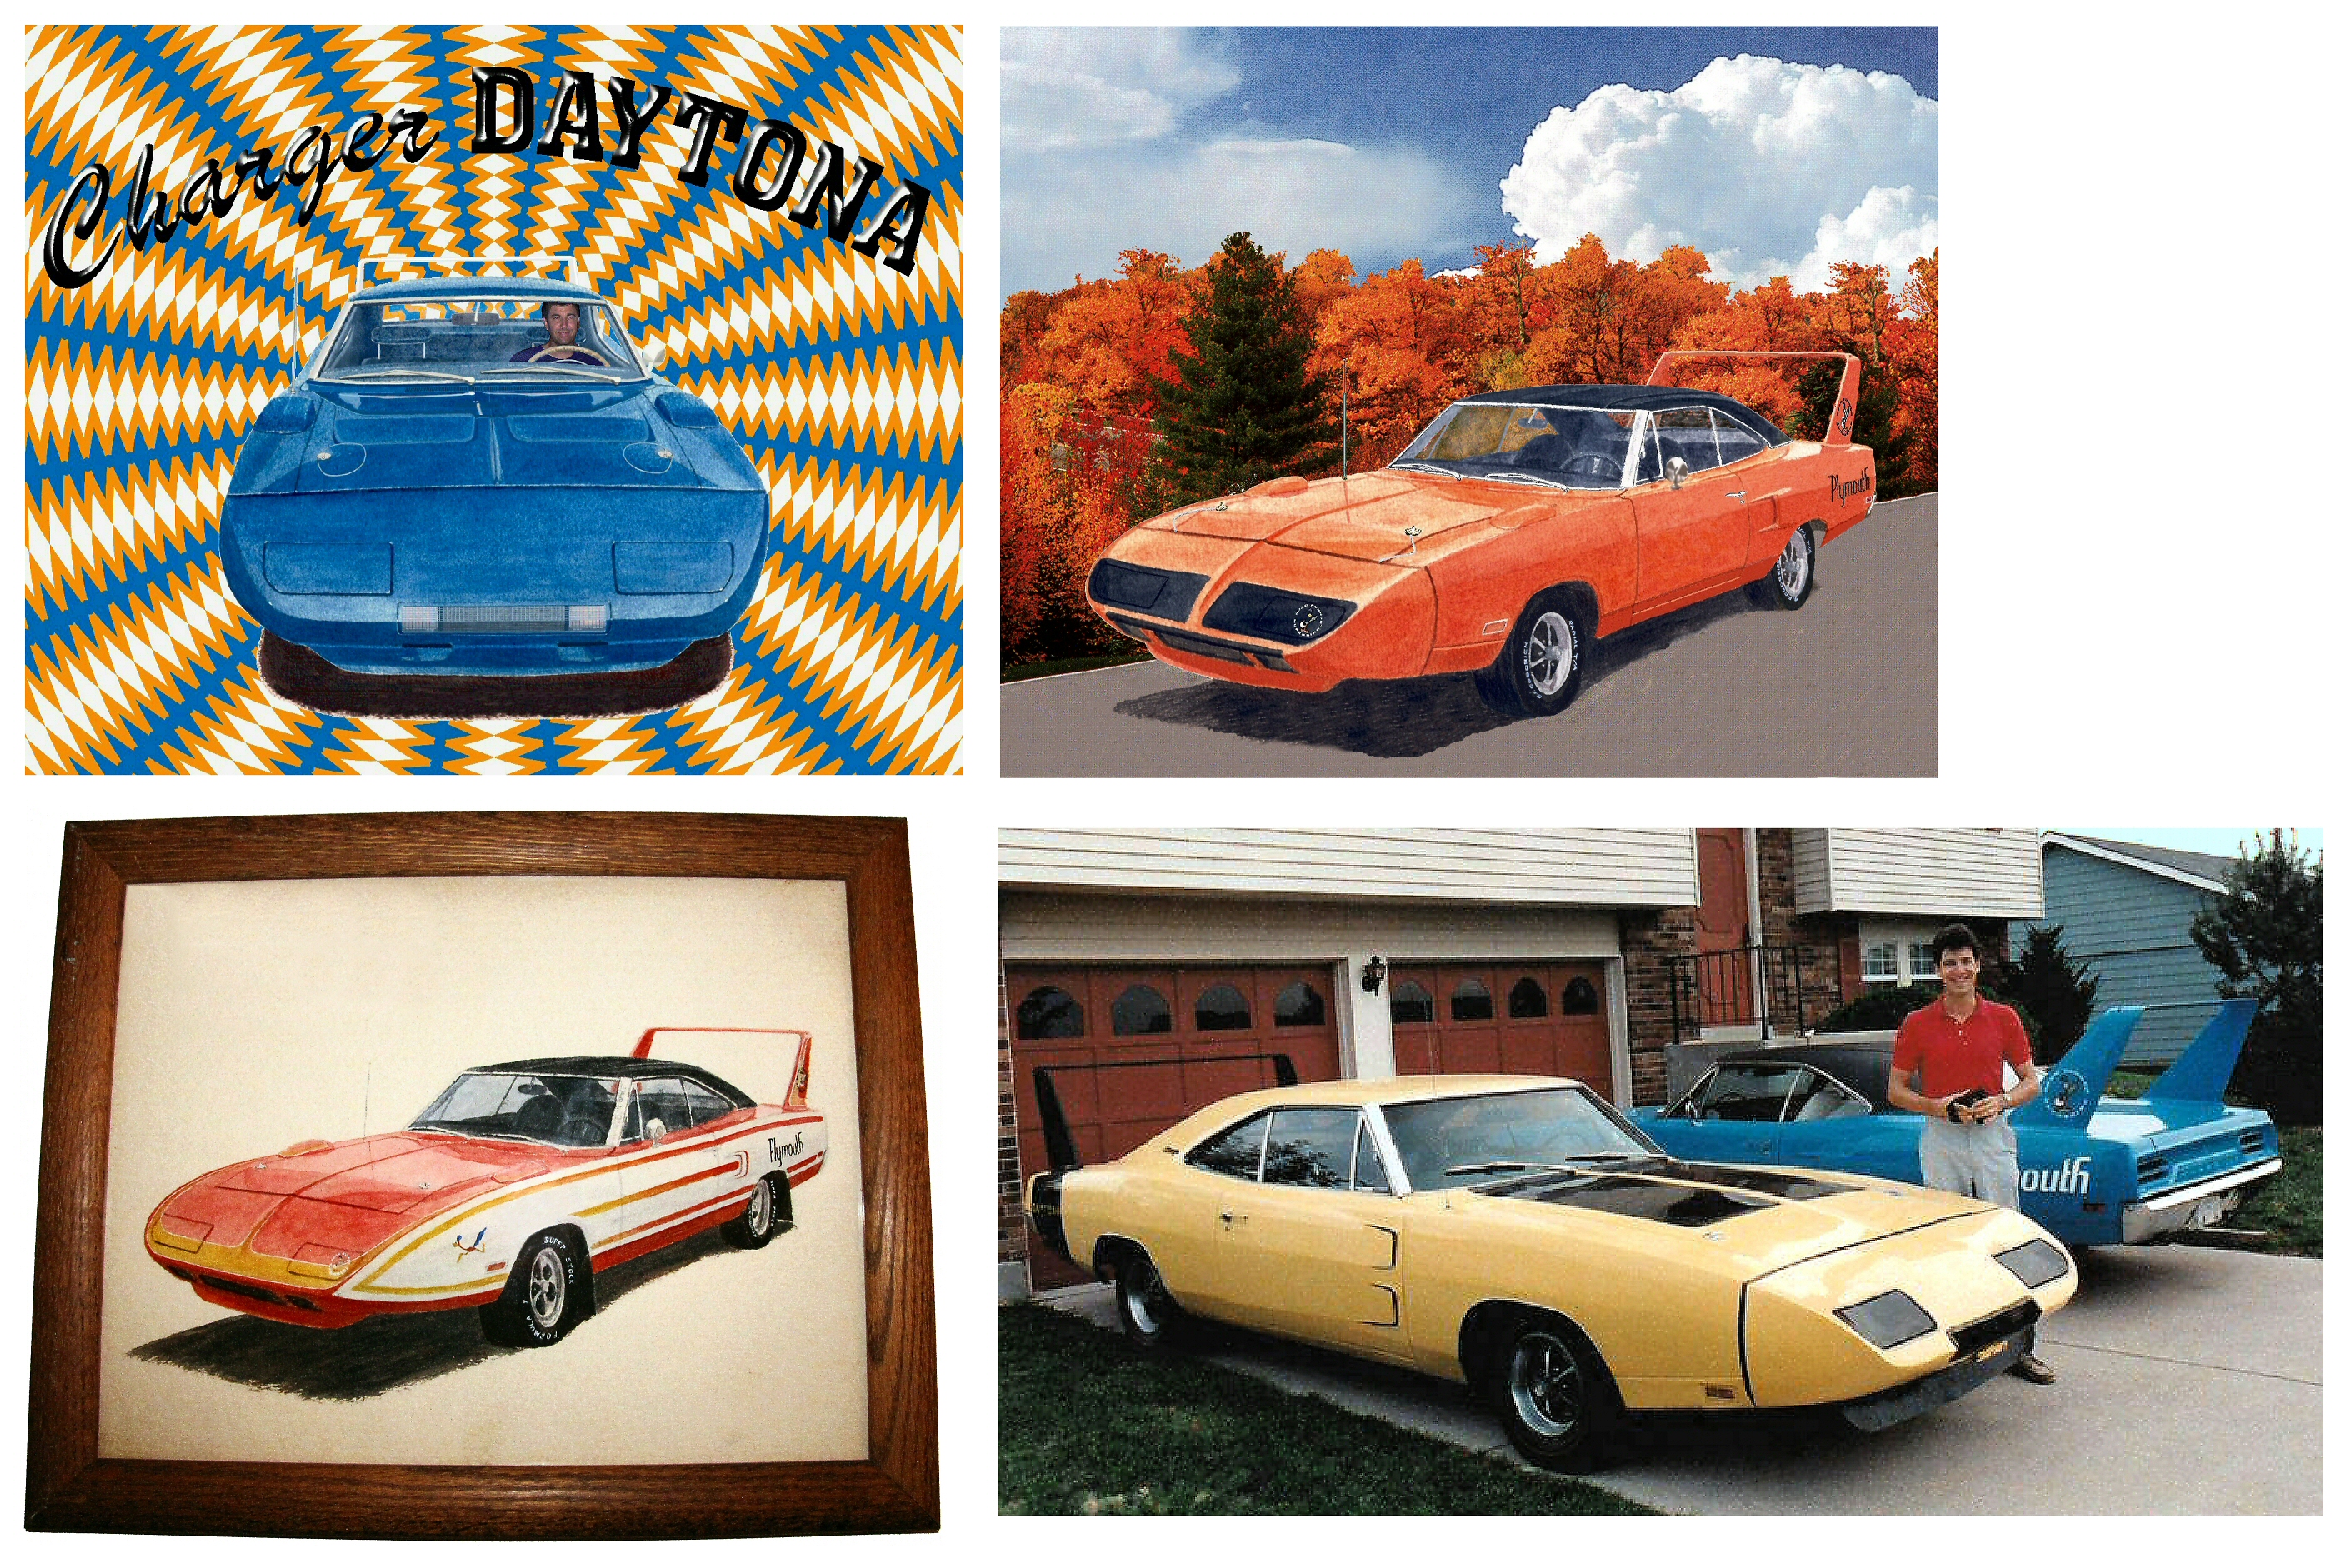 1969 Dodge Charger Daytona and 1970 Plymouth Road Runner Superbird Watercolors